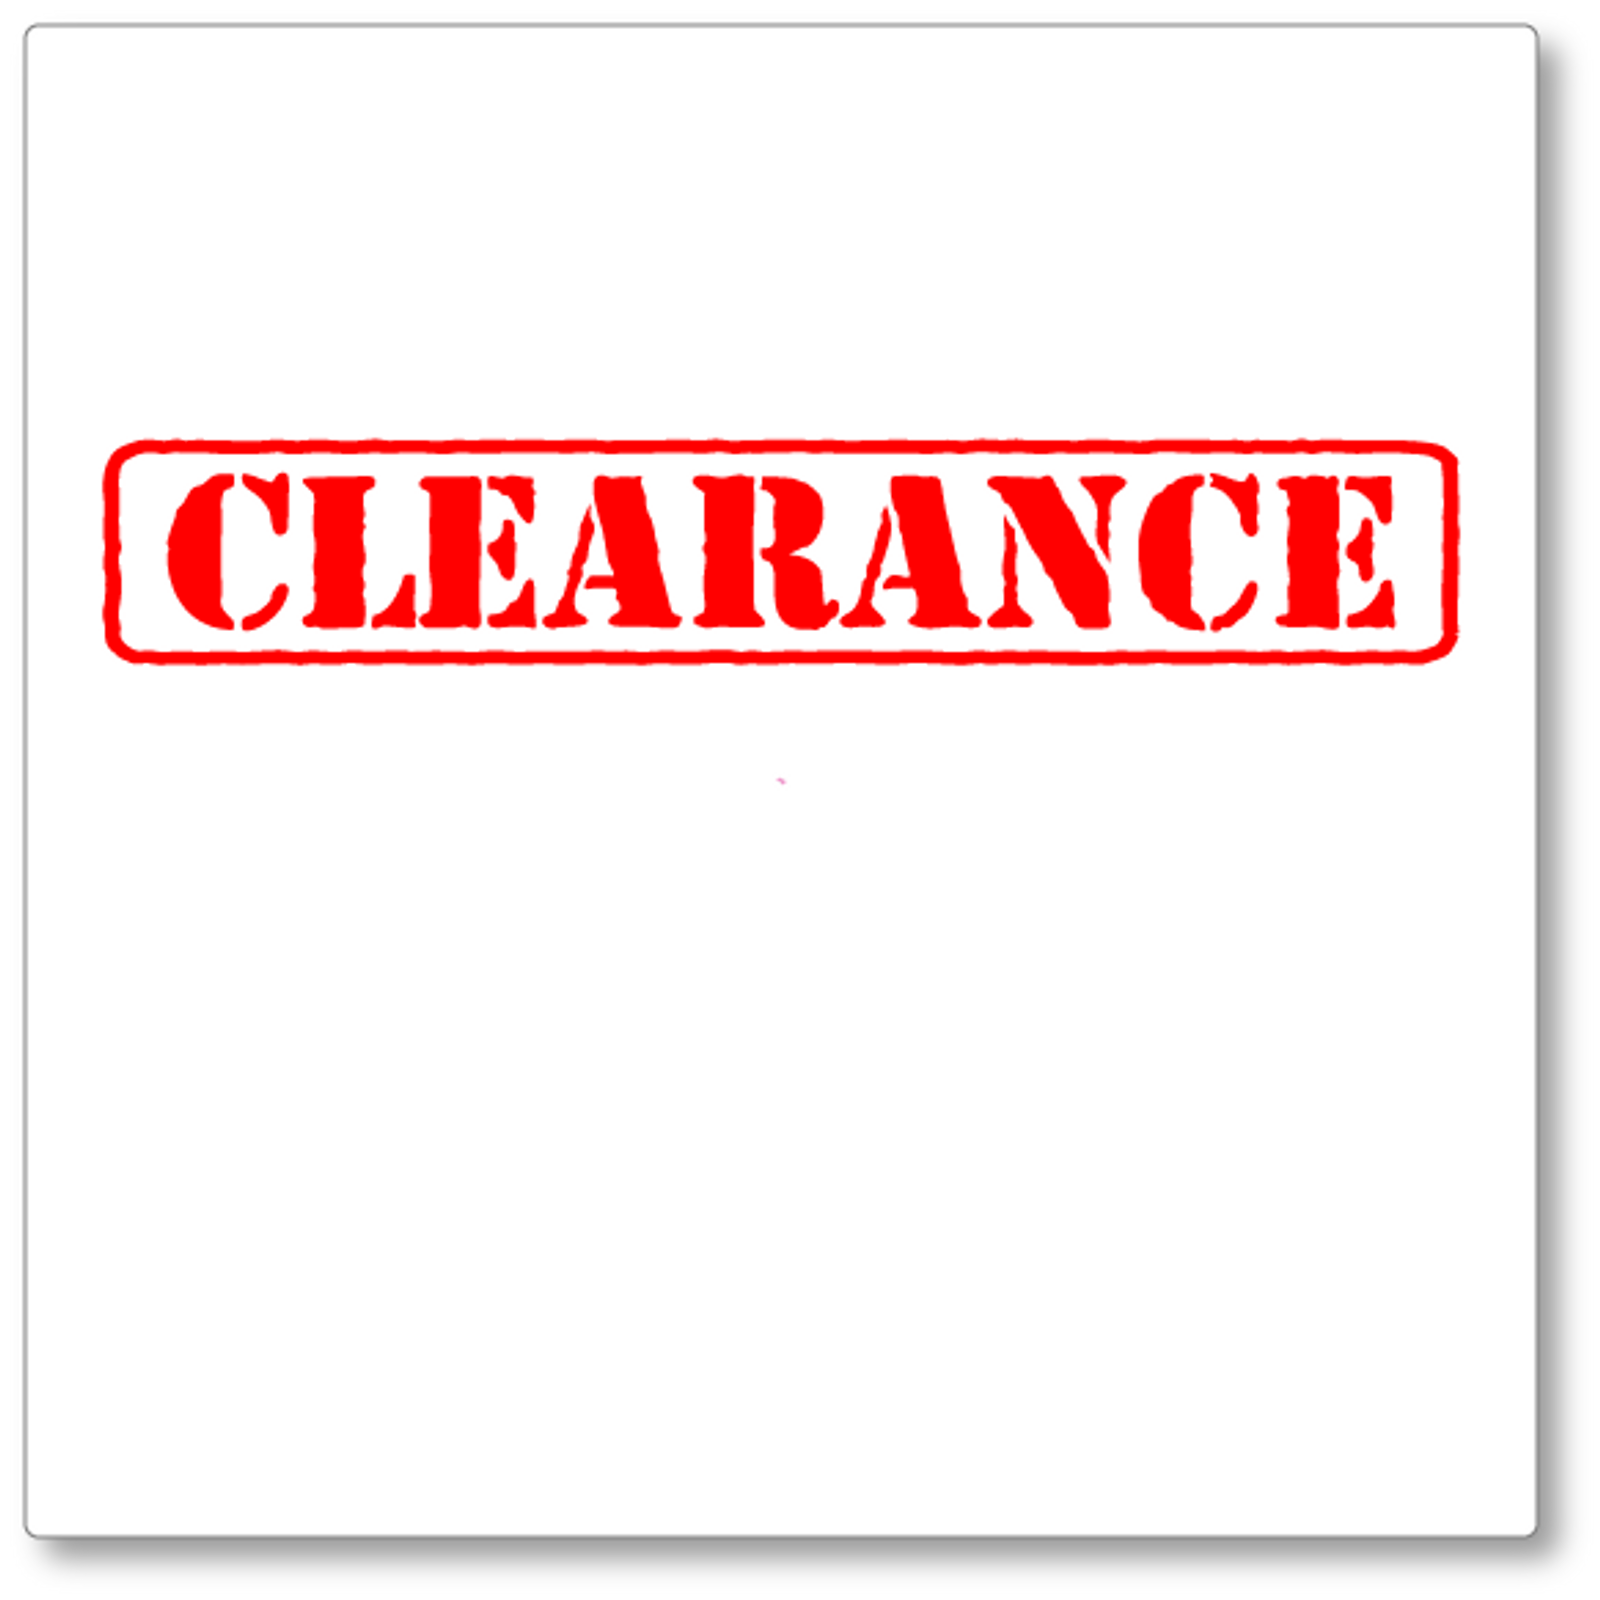 CLEARANCE Shop Window decal - stencil